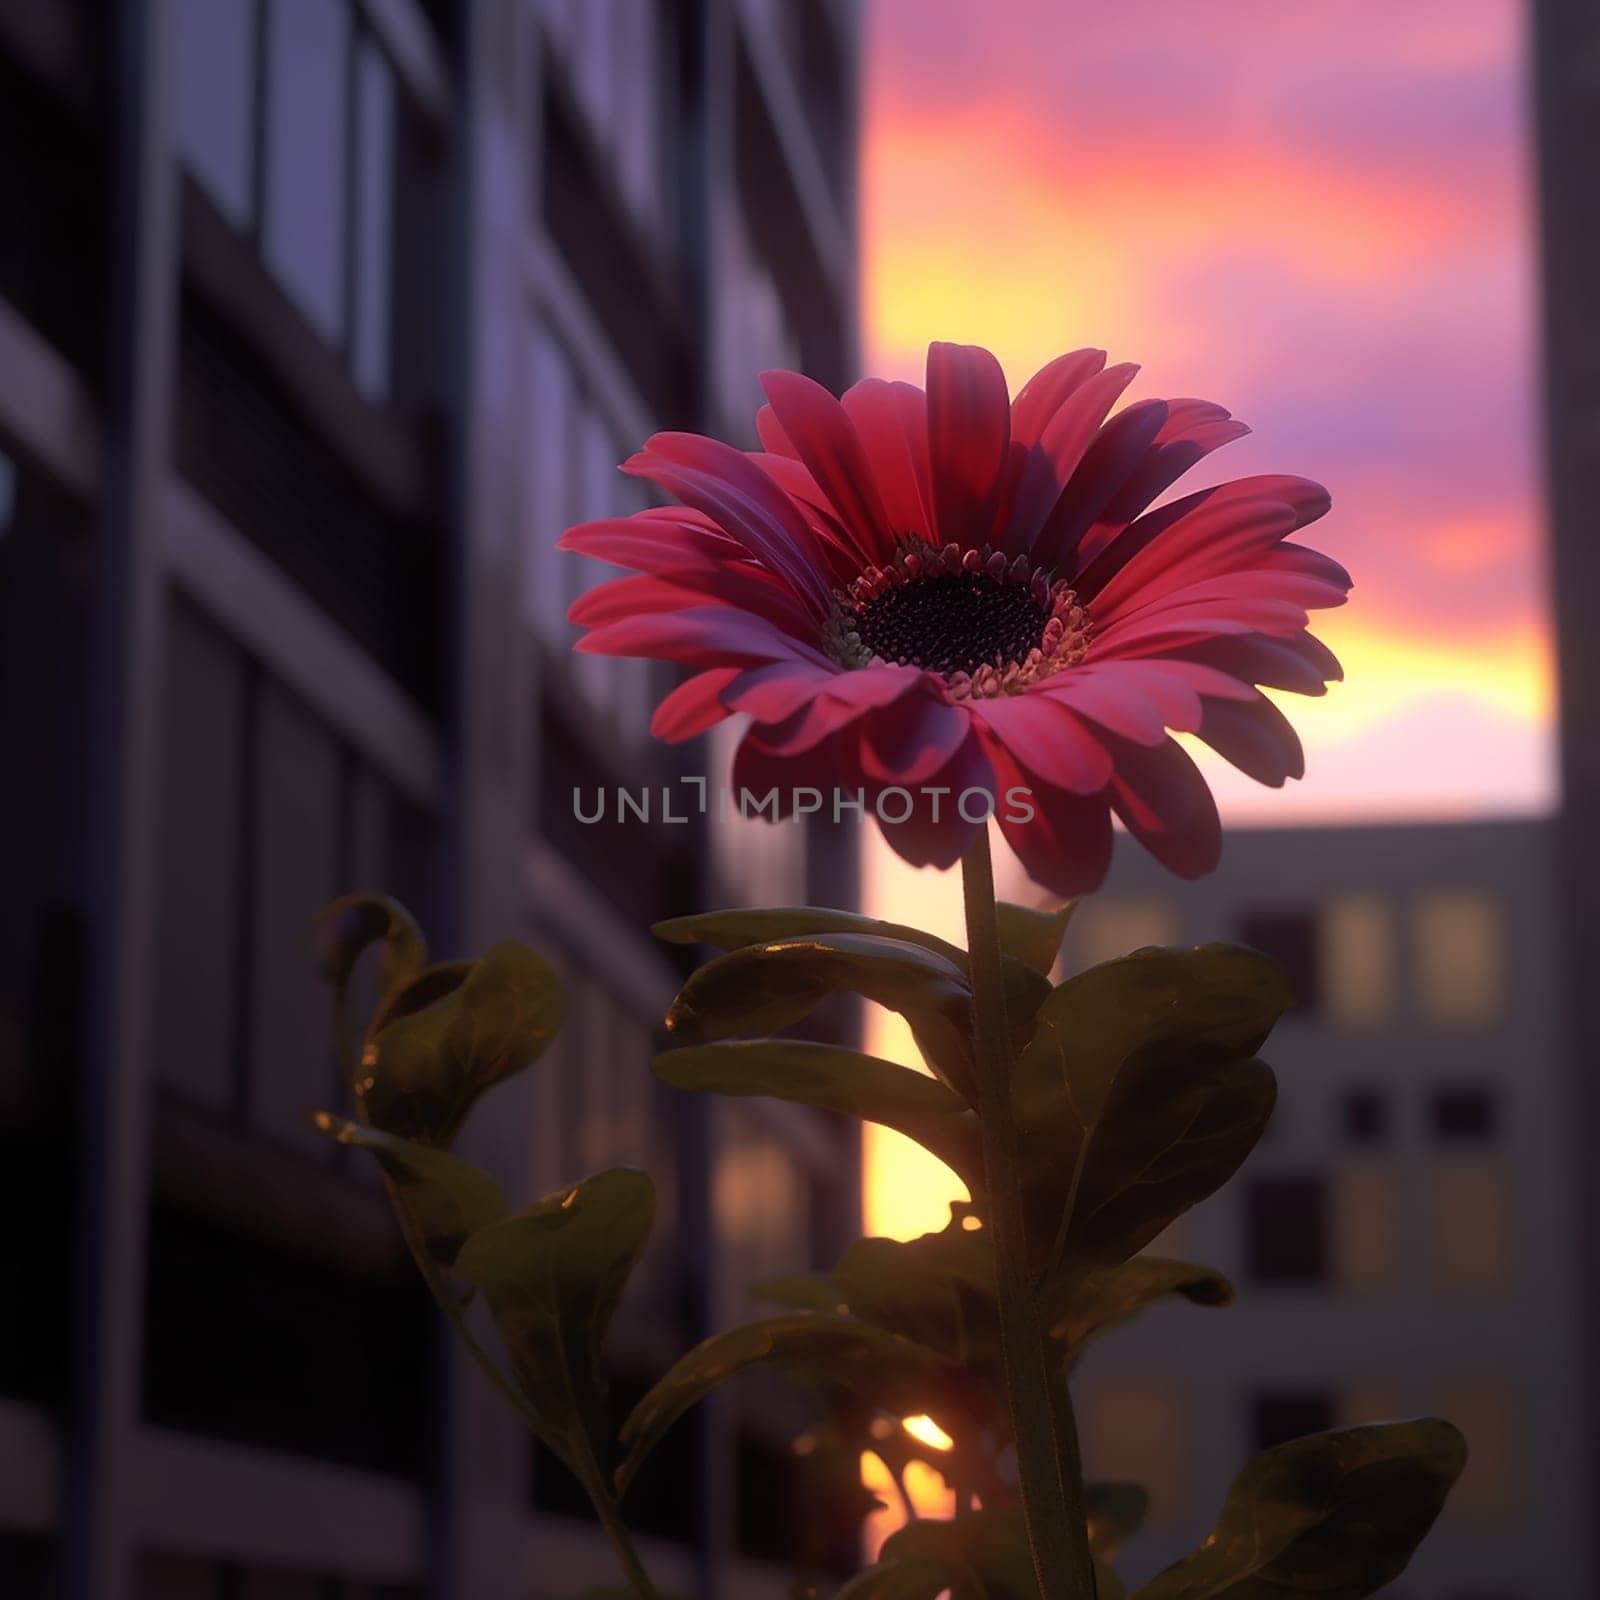 Red flower at twilight with urban backdrop.